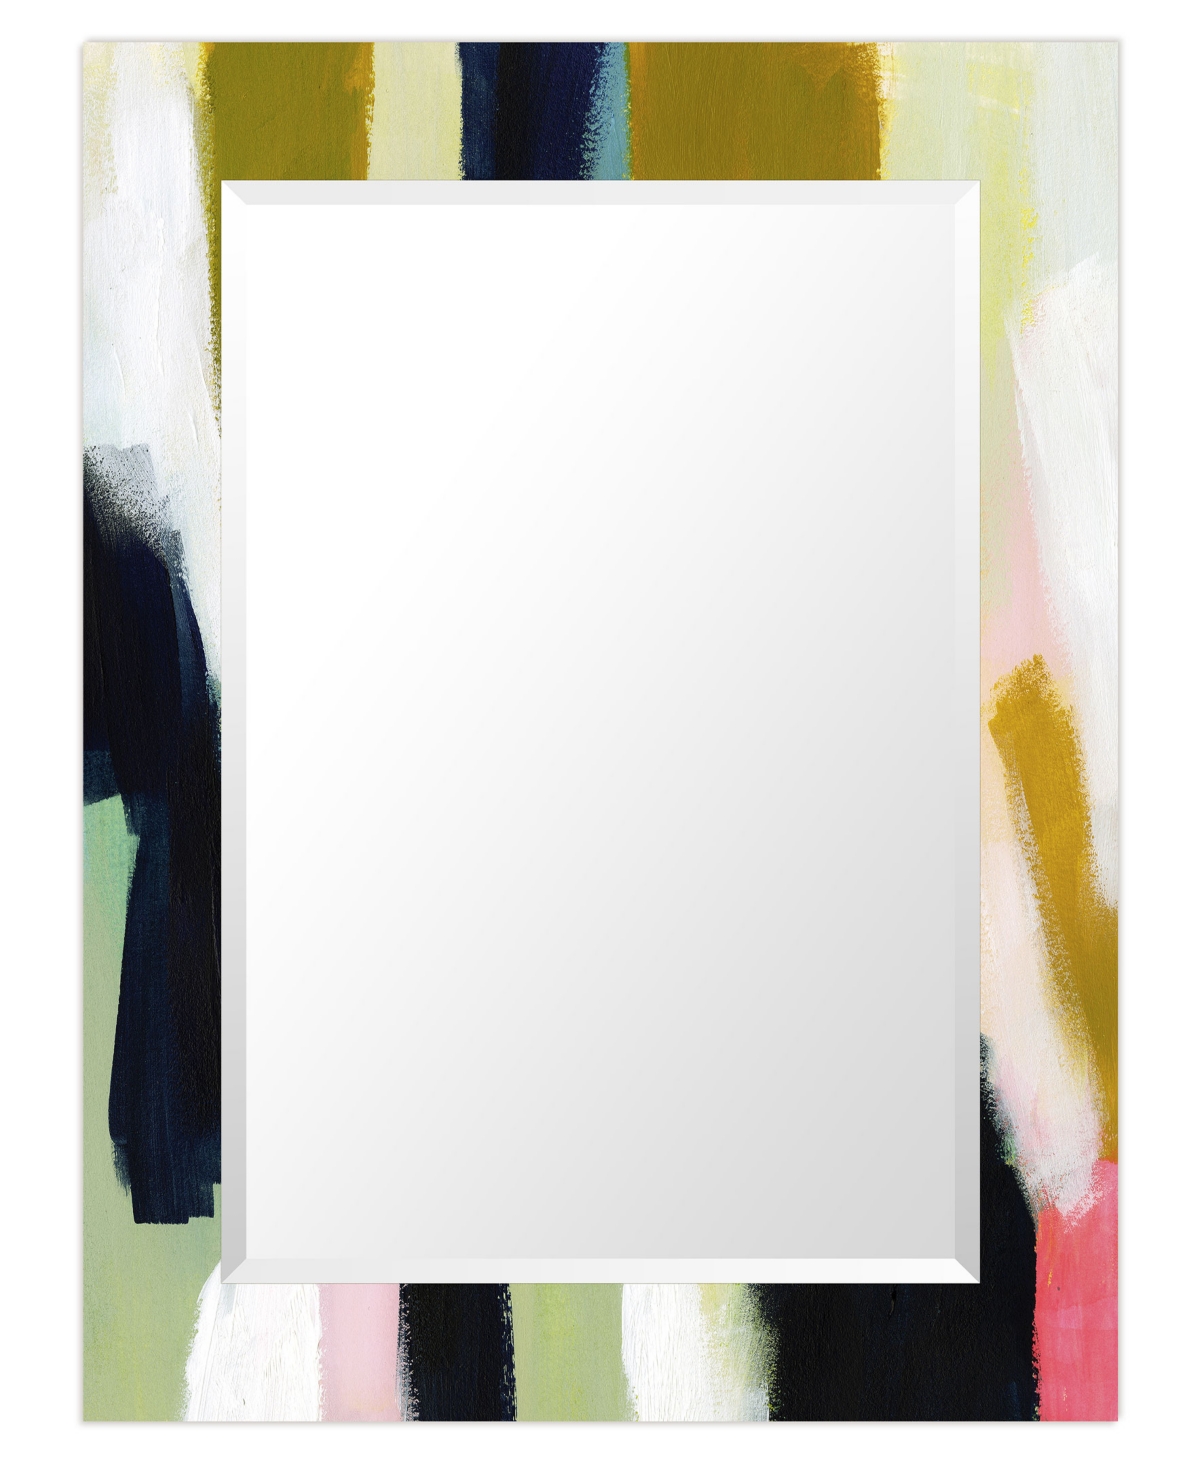 Empire Art Direct "amagansett I" Rectangular Beveled Mirror On Free Floating Printed Tempered Art Glass, 30" X 40" X 0 In Multi-color